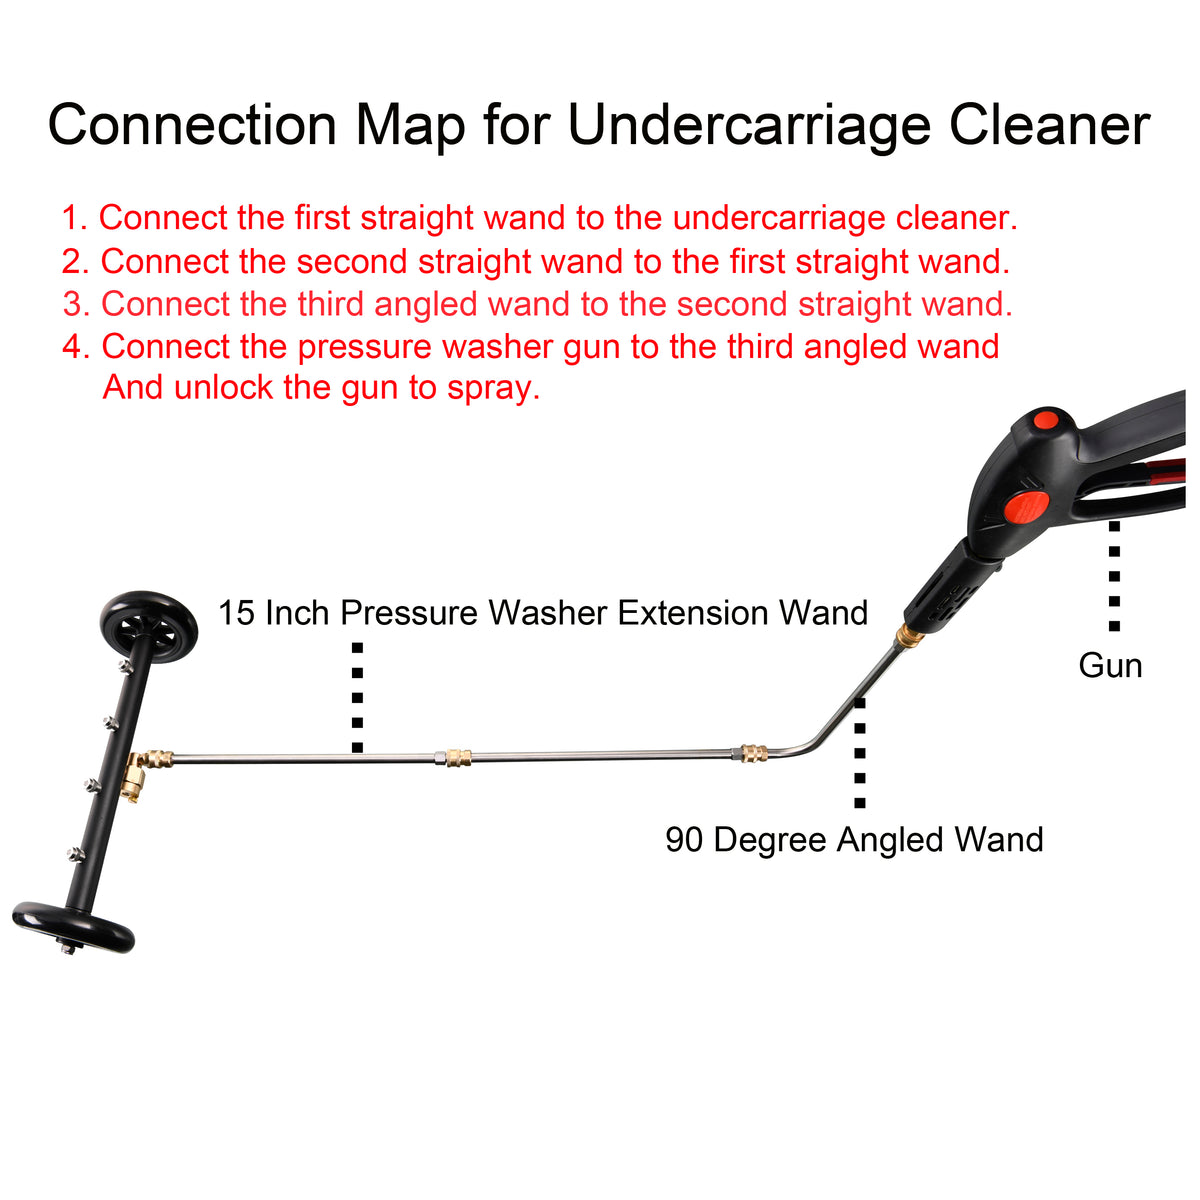 A+ Undercarriage Cleaner Kit, 21 - 9.116-556.0